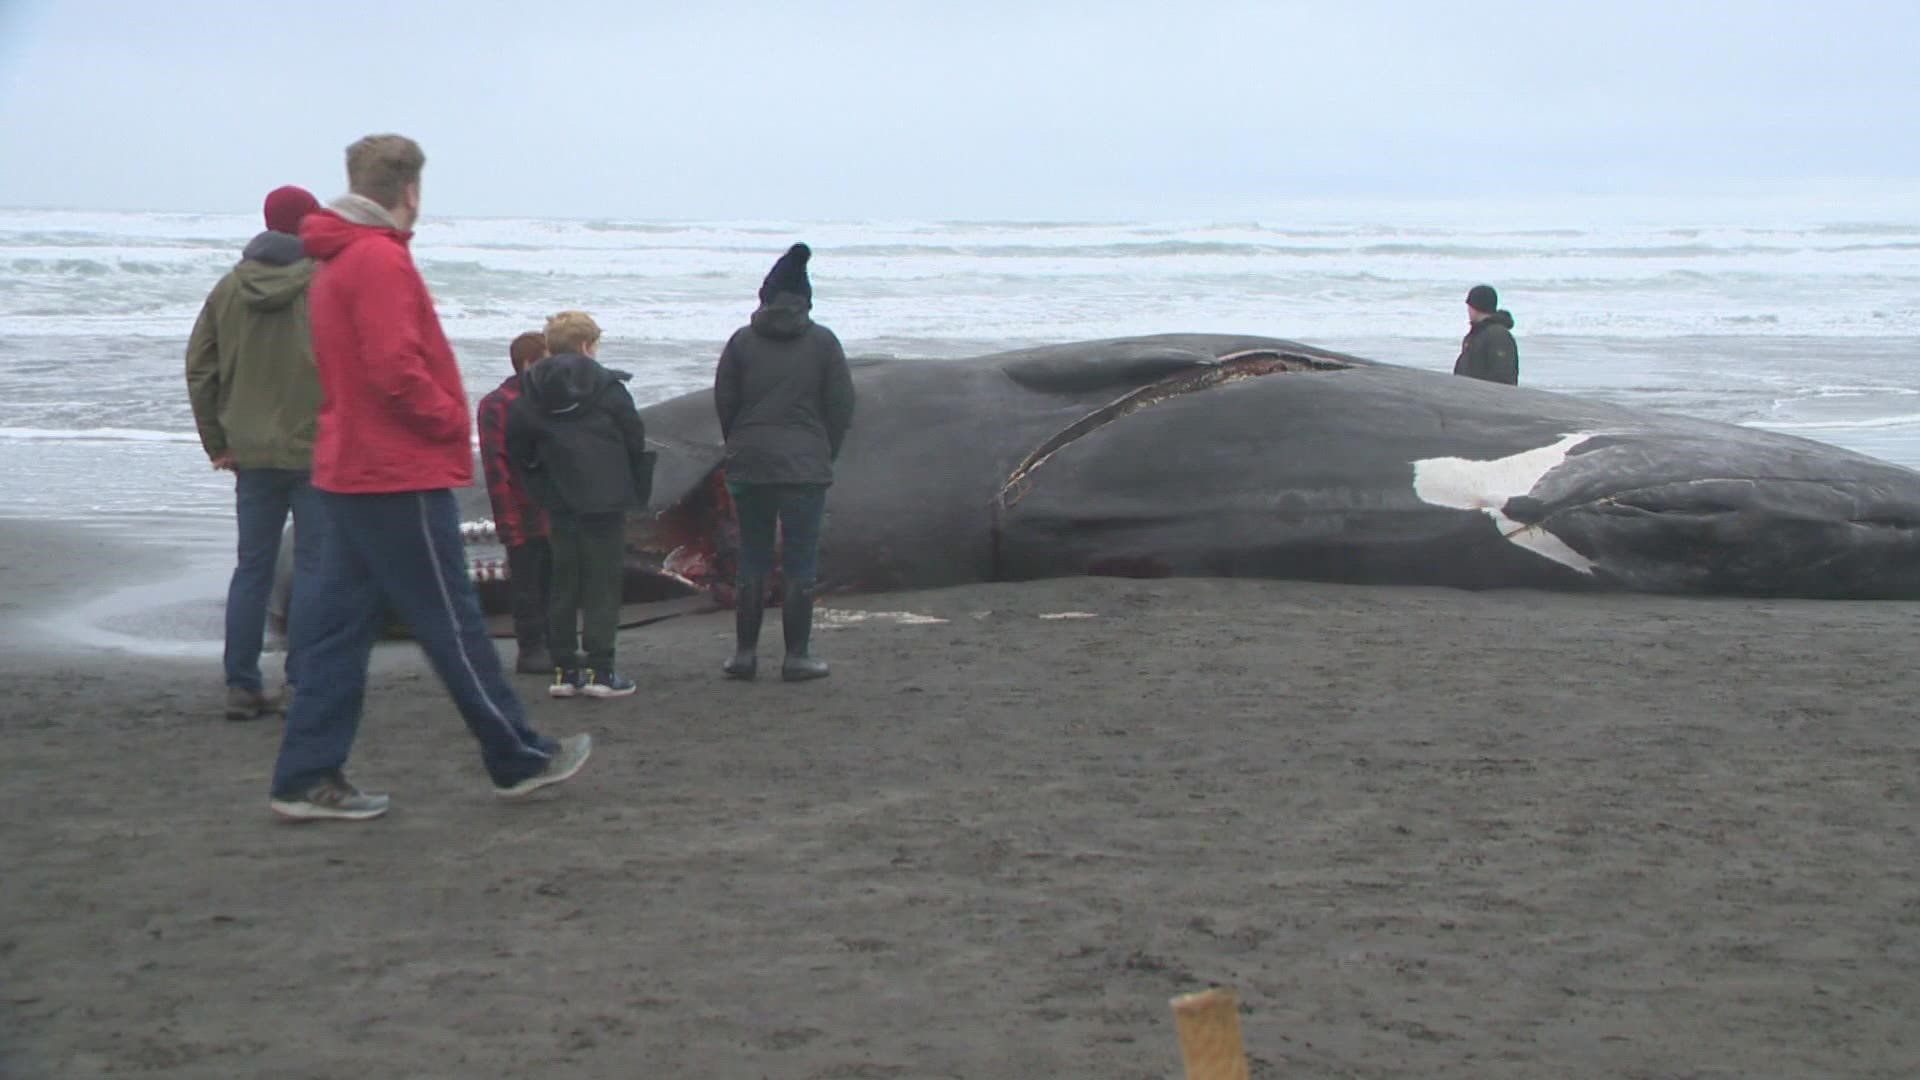 An expert explains what's next for washed-up whale on Oregon Coast - OPB